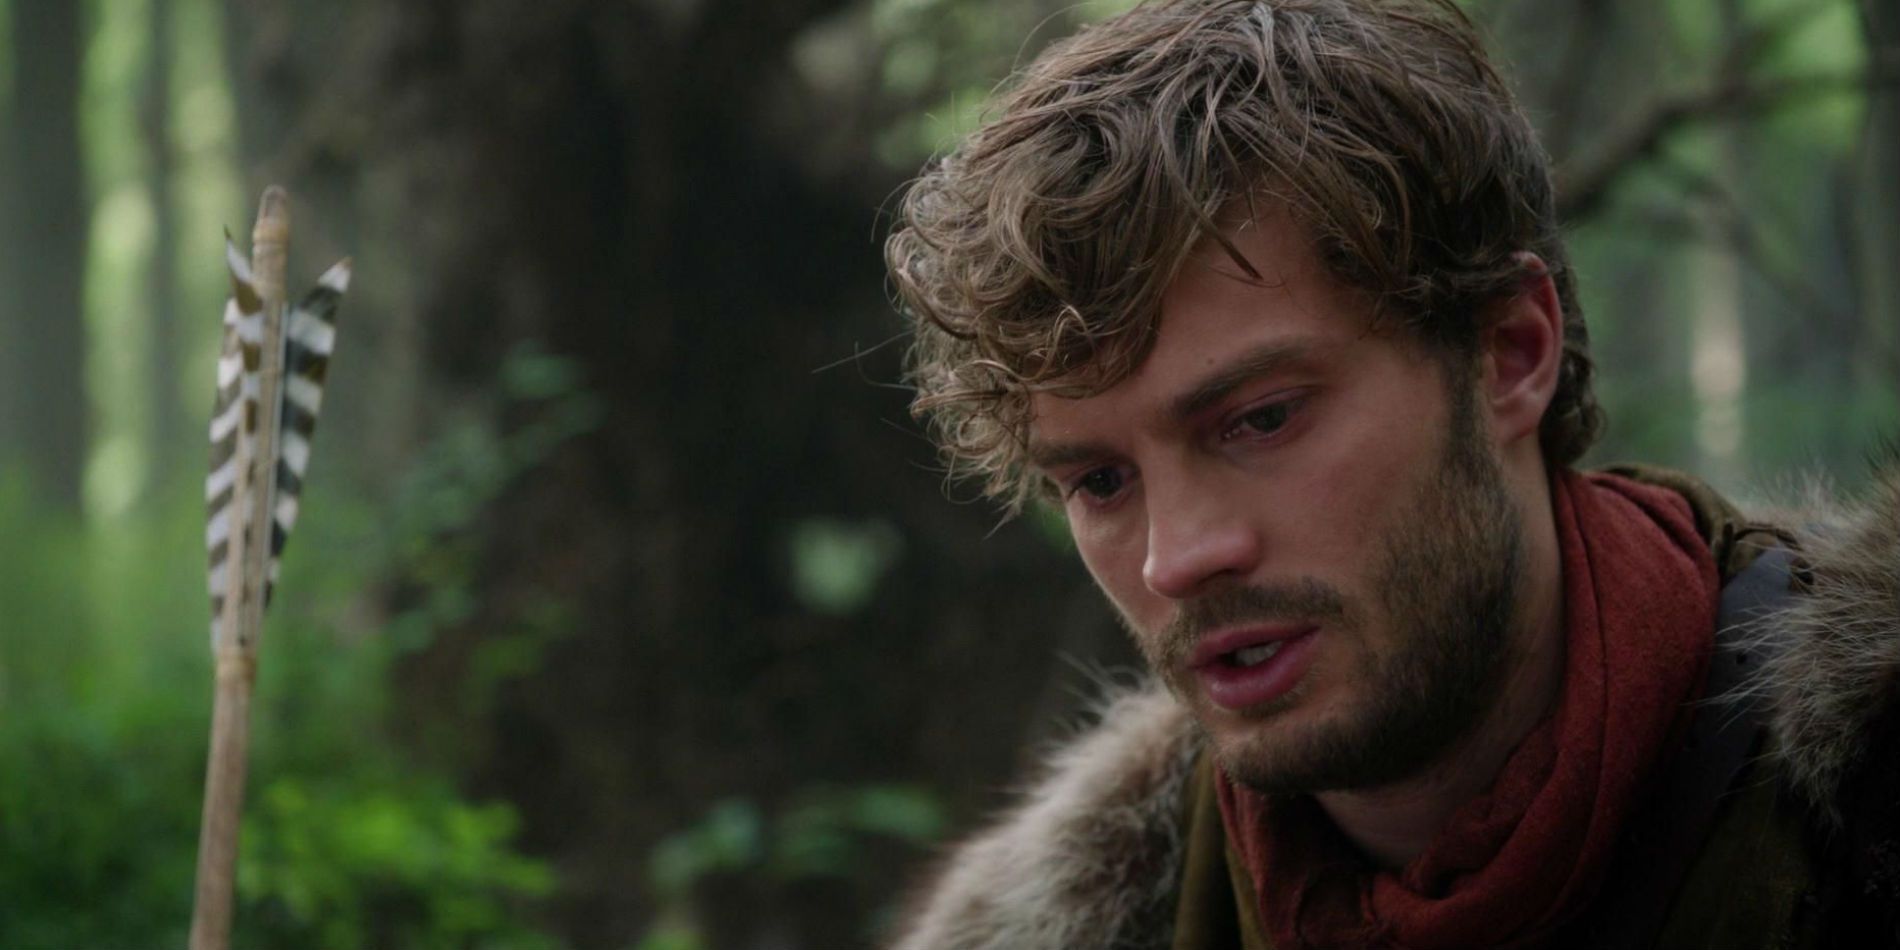 Jamie Dornan as the Huntsman in Once Upon A Time